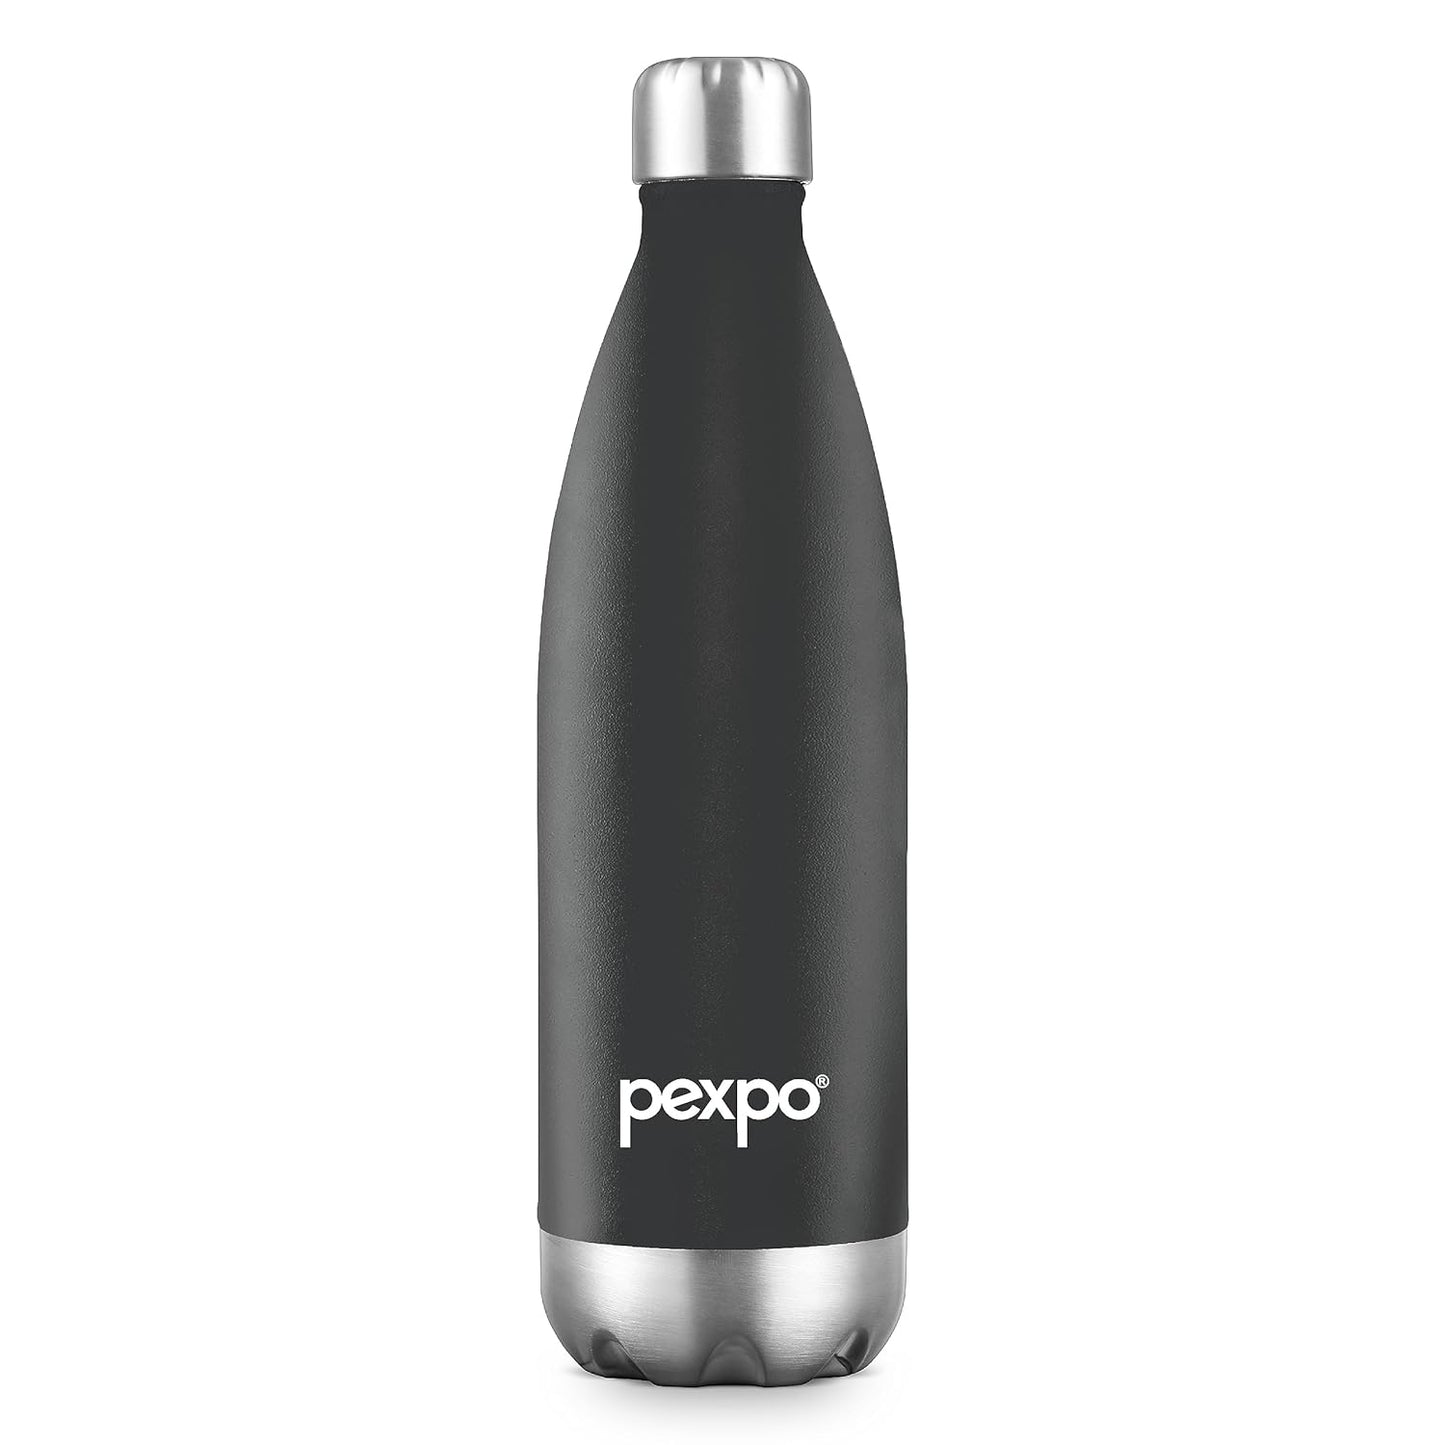 Pexpo Electro - Stainless Steel Vacuum Insulated Leak Proof Bottle | 24/7 Hot & Cold | ISI Certified